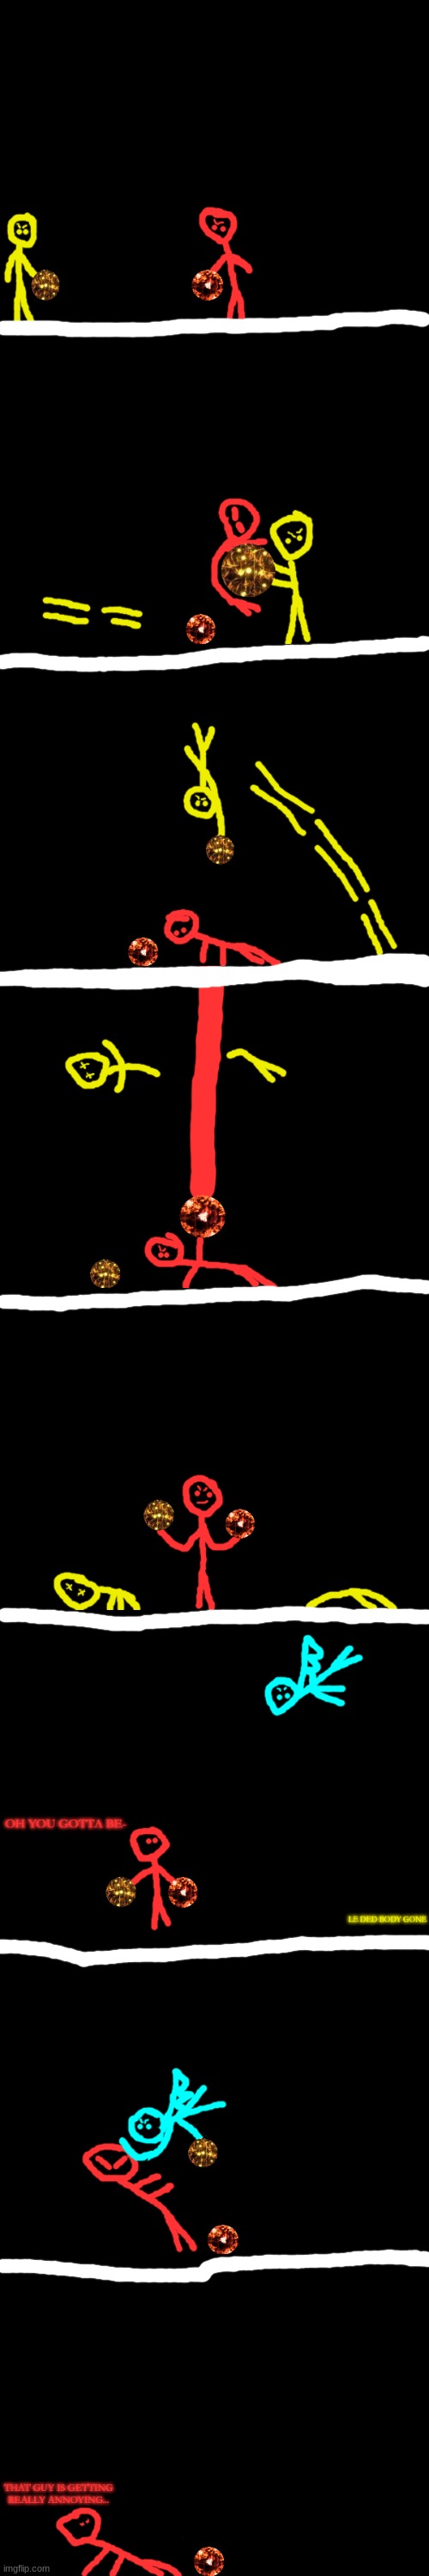 The world of stickmen #6: The orb of mobility | image tagged in stick figure,stickman | made w/ Imgflip meme maker